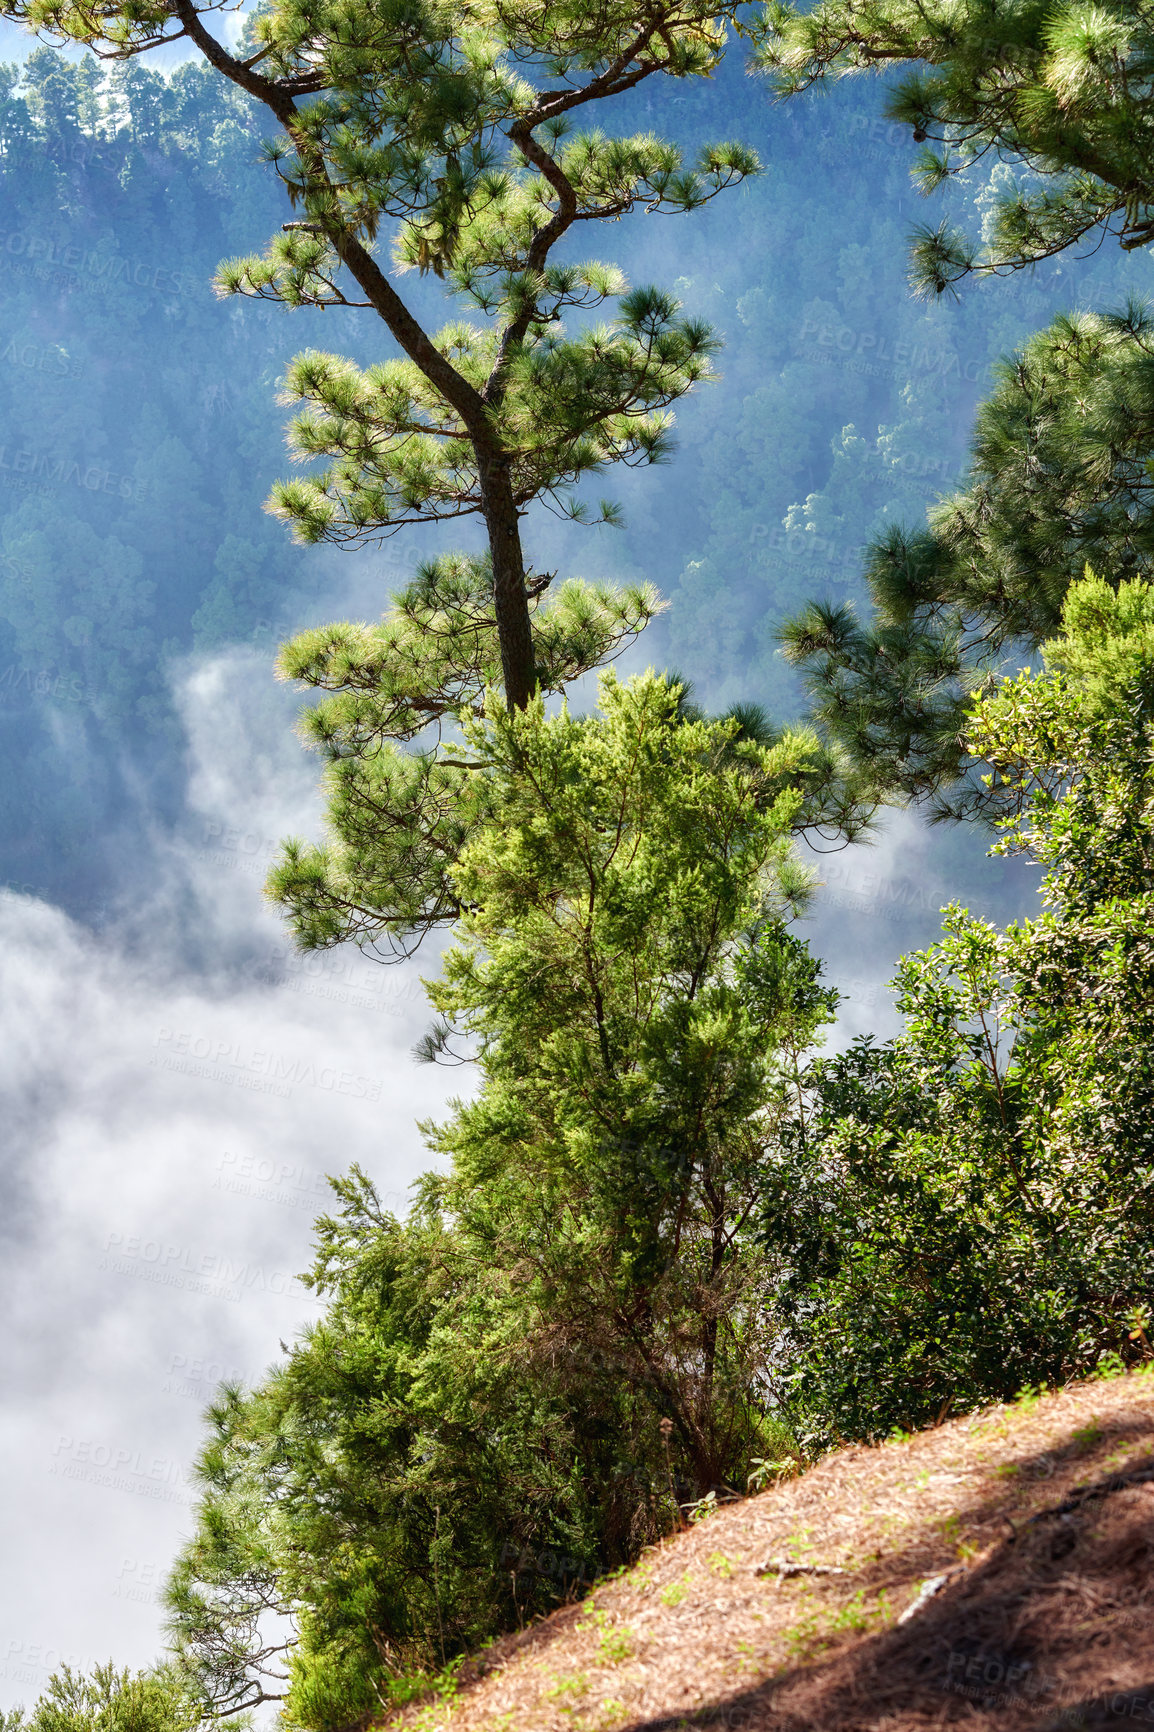 Buy stock photo Copyspace and scenic landscape of foggy pine forests in the mountains of La Palma, Canary Islands, Spain. Forestry with view of a steep hill covered in green vegetation and shrubs during summer